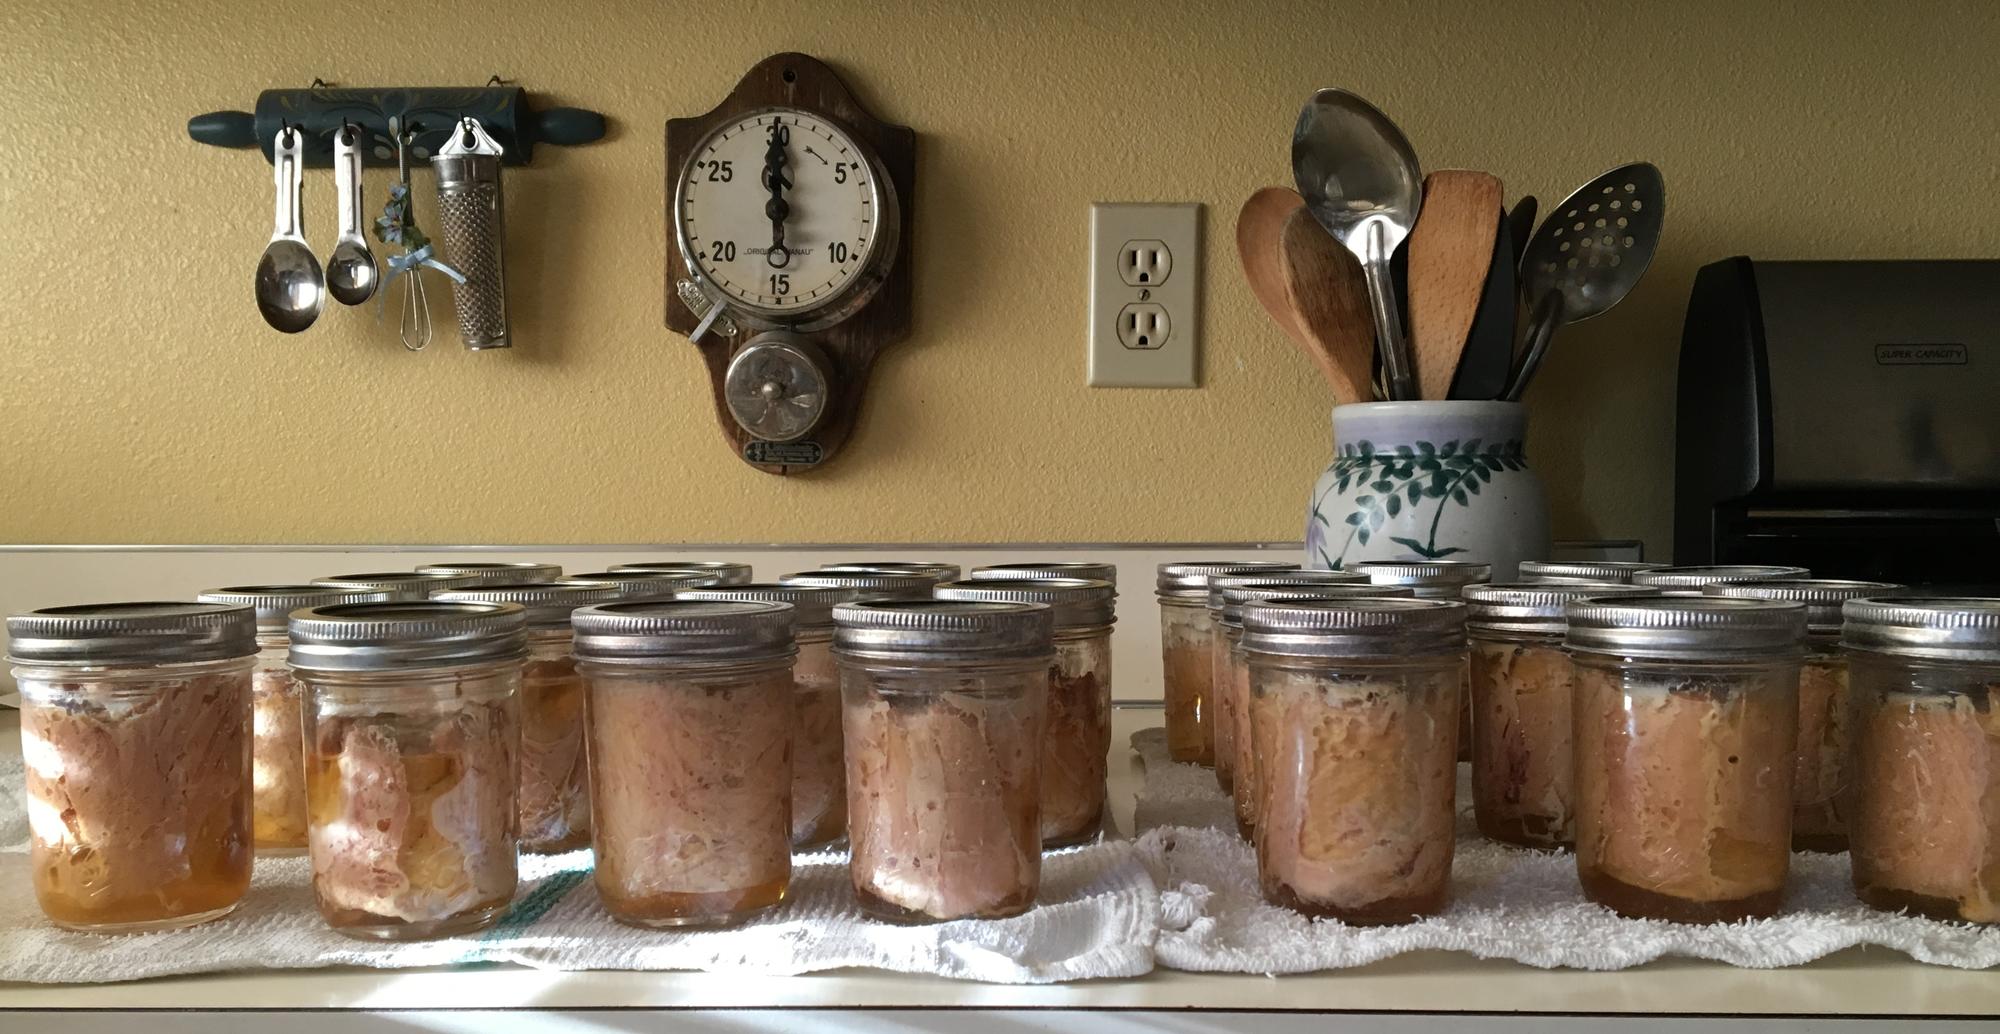 Three dozen half-pint jars of canned tuna cooling after pressure canner processing.